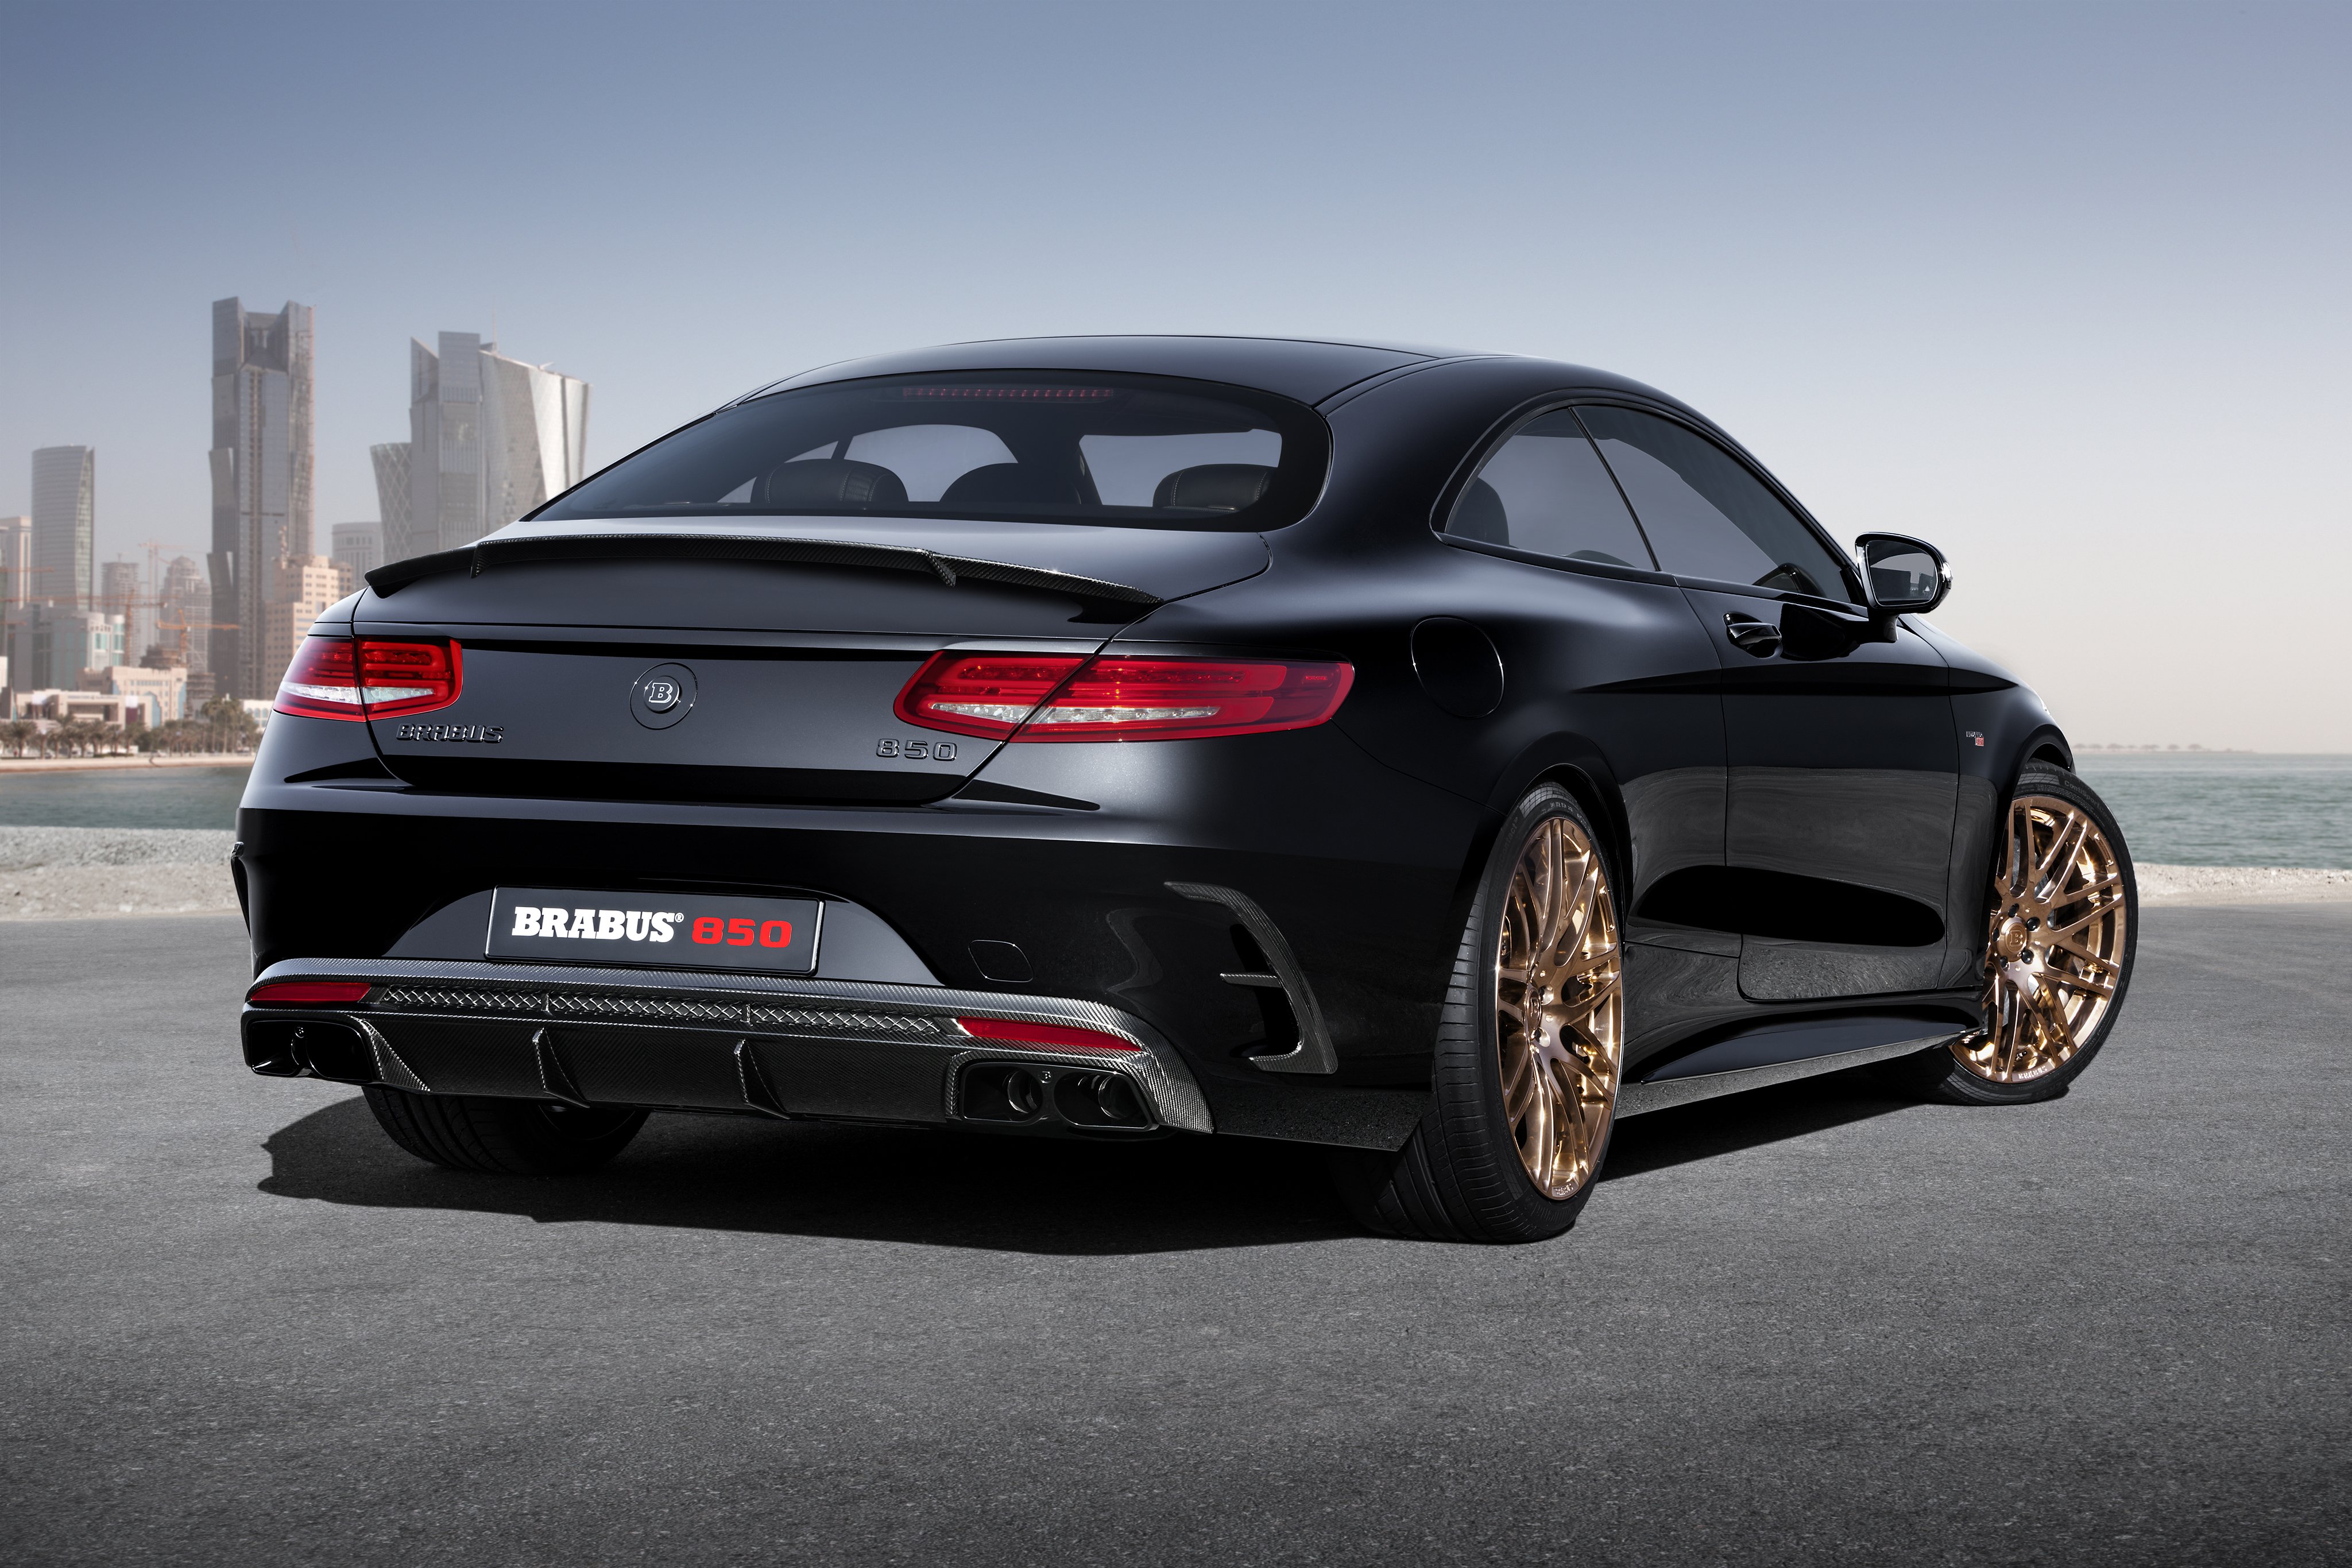 2015, Brabus, Mercedes, Benz, S63, Amg, Coupe, C217, Tuning Wallpaper